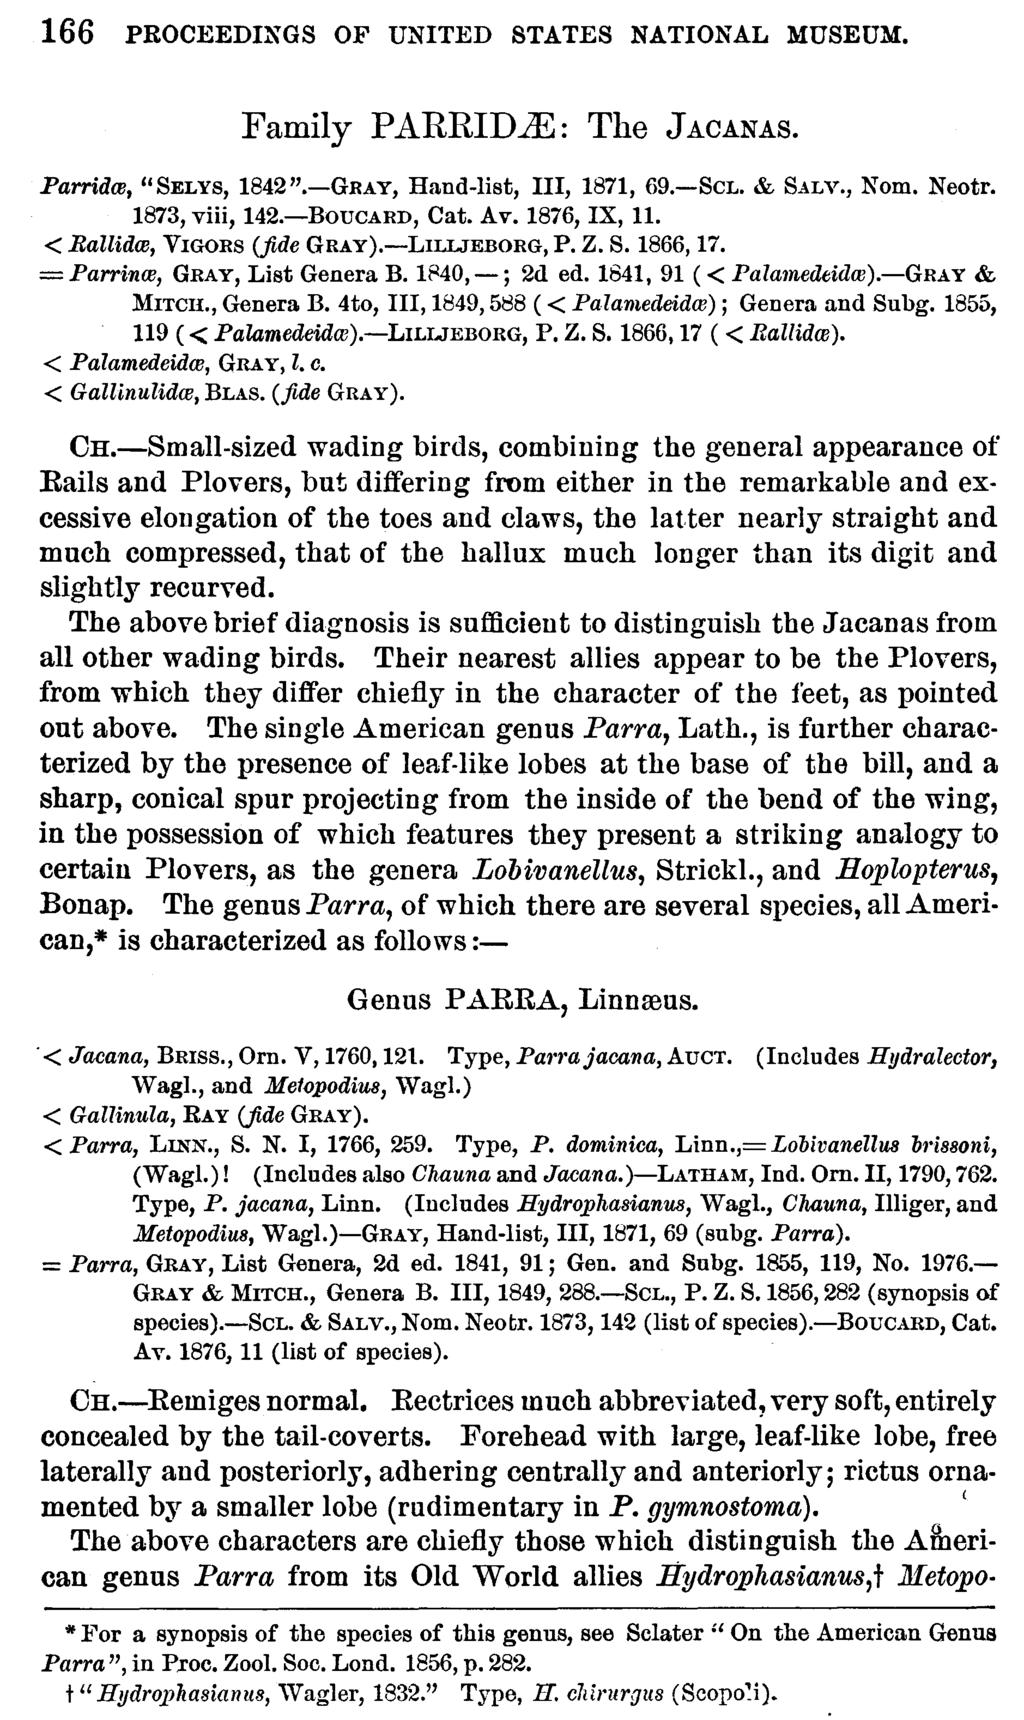 166 PROCEEDINGS OF UNITED STATES NATIONAL MUSEUM. Family PARRID... : The JACANAS. Parridre, "SELYS, 1842".-GRAY, Hand-list, III, 1871, 69.-SCL. & SALV., Nom. Neotr. 1873, viii, 142.-BouCARD, Cat. Av.